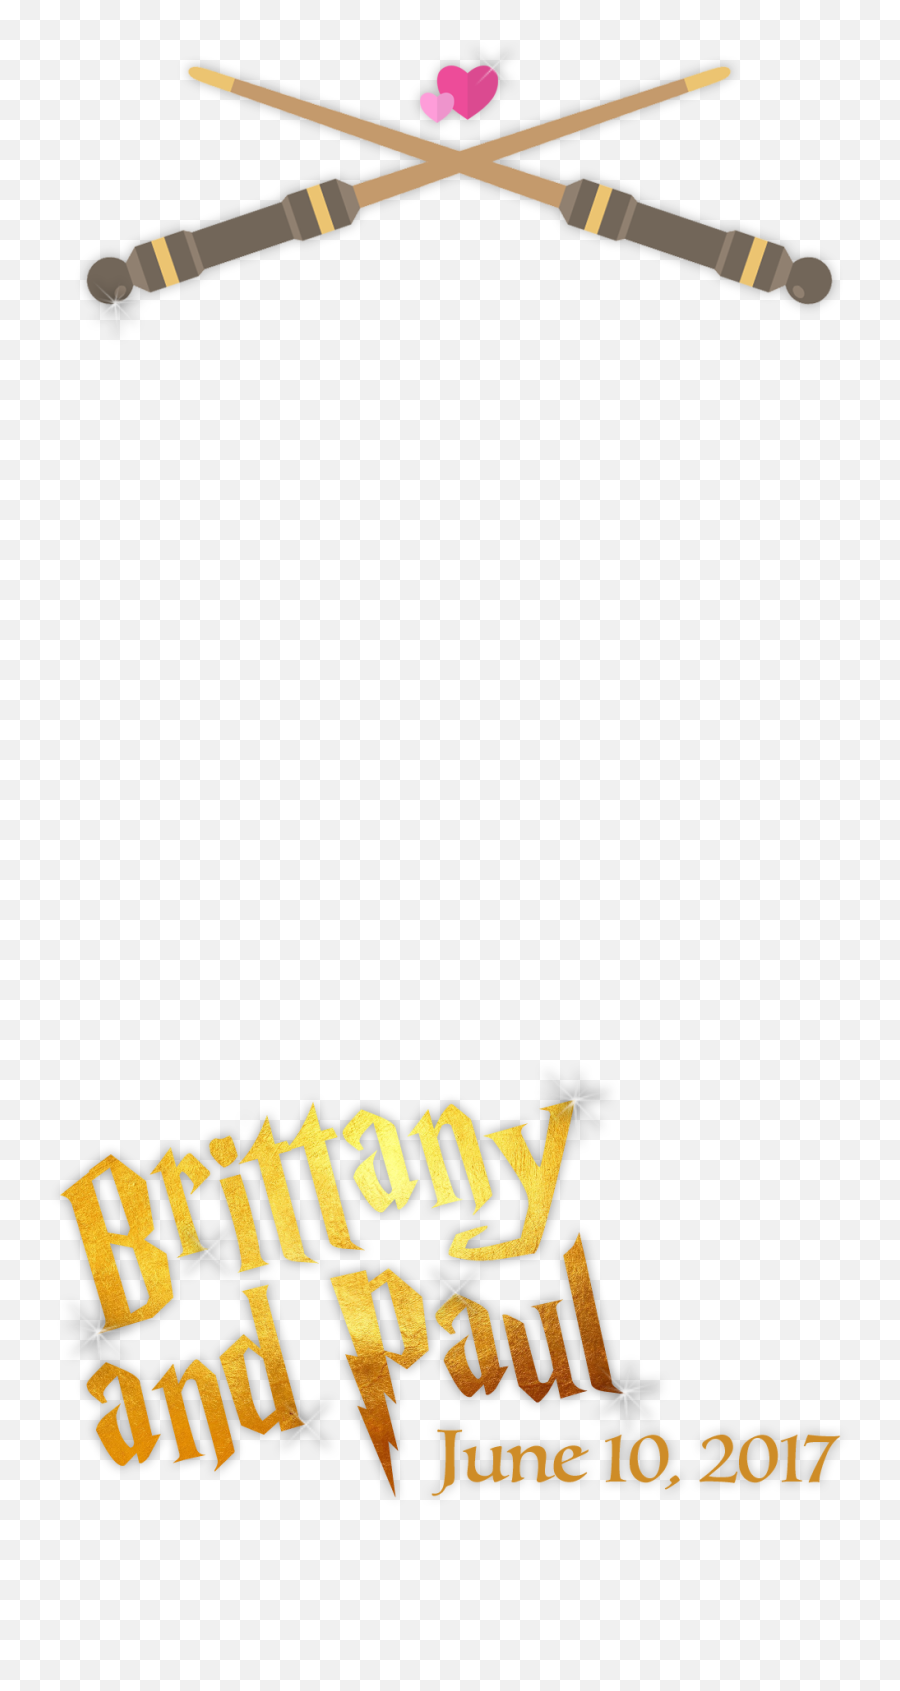 Snapchat Filter Brittany And Paulu0027s Wedding On Behance Emoji,Transparent Snapchat Filter